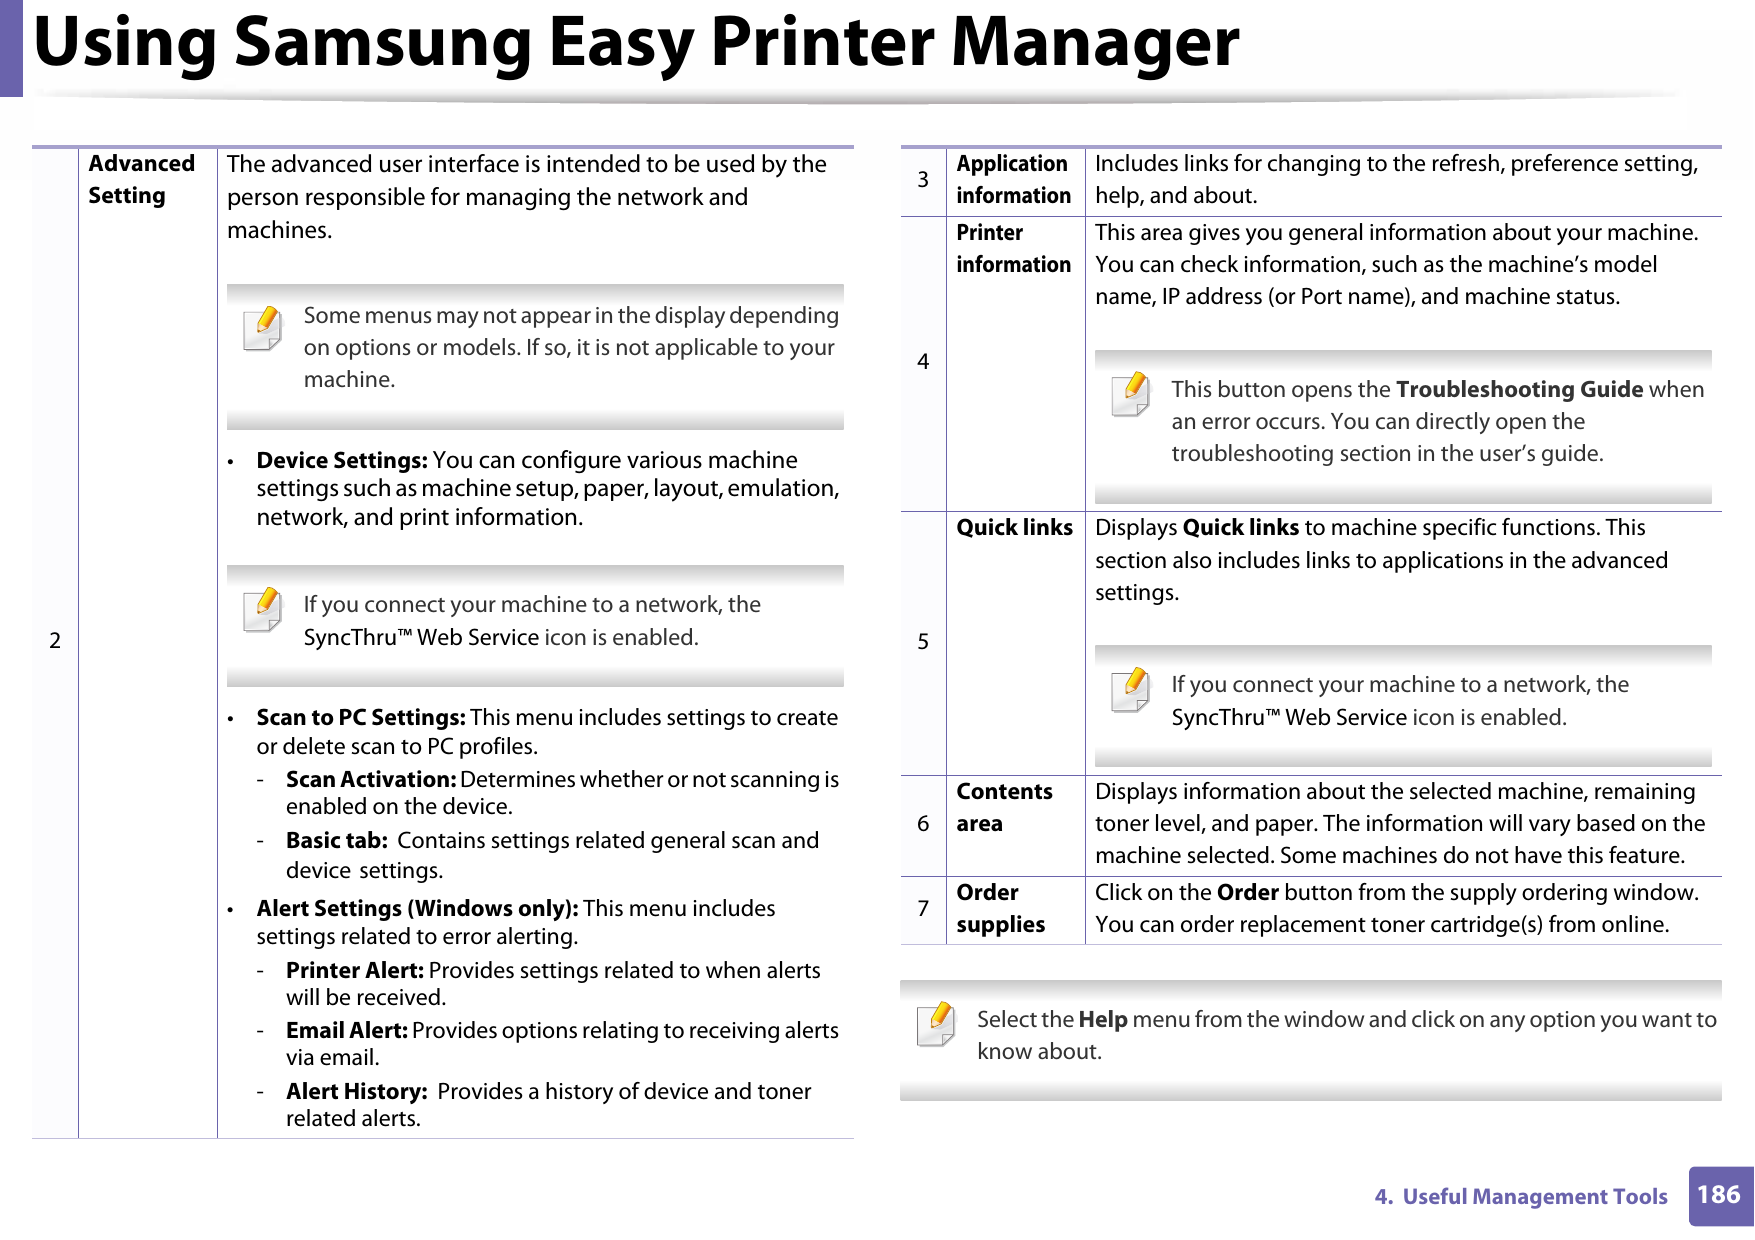 Using Samsung Easy Printer Manager1864.  Useful Management Tools Select the Help menu from the window and click on any option you want to know about. 2Advanced SettingThe advanced user interface is intended to be used by the person responsible for managing the network and machines. Some menus may not appear in the display depending on options or models. If so, it is not applicable to your machine. •Device Settings: You can configure various machine settings such as machine setup, paper, layout, emulation, network, and print information. If you connect your machine to a network, the SyncThru™ Web Service icon is enabled. •Scan to PC Settings: This menu includes settings to create or delete scan to PC profiles.-Scan Activation: Determines whether or not scanning is enabled on the device.-Basic tab:  Contains settings related general scan and device settings.•Alert Settings (Windows only): This menu includes settings related to error alerting.-Printer Alert: Provides settings related to when alerts will be received.-Email Alert: Provides options relating to receiving alerts via email.-Alert History:  Provides a history of device and toner related alerts.3Application informationIncludes links for changing to the refresh, preference setting, help, and about.4Printer informationThis area gives you general information about your machine. You can check information, such as the machine’s model name, IP address (or Port name), and machine status. This button opens the Troubleshooting Guide when an error occurs. You can directly open the troubleshooting section in the user’s guide. 5Quick links Displays Quick links to machine specific functions. This section also includes links to applications in the advanced settings. If you connect your machine to a network, the SyncThru™ Web Service icon is enabled. 6Contents areaDisplays information about the selected machine, remaining toner level, and paper. The information will vary based on the machine selected. Some machines do not have this feature.7Order suppliesClick on the Order button from the supply ordering window. You can order replacement toner cartridge(s) from online.